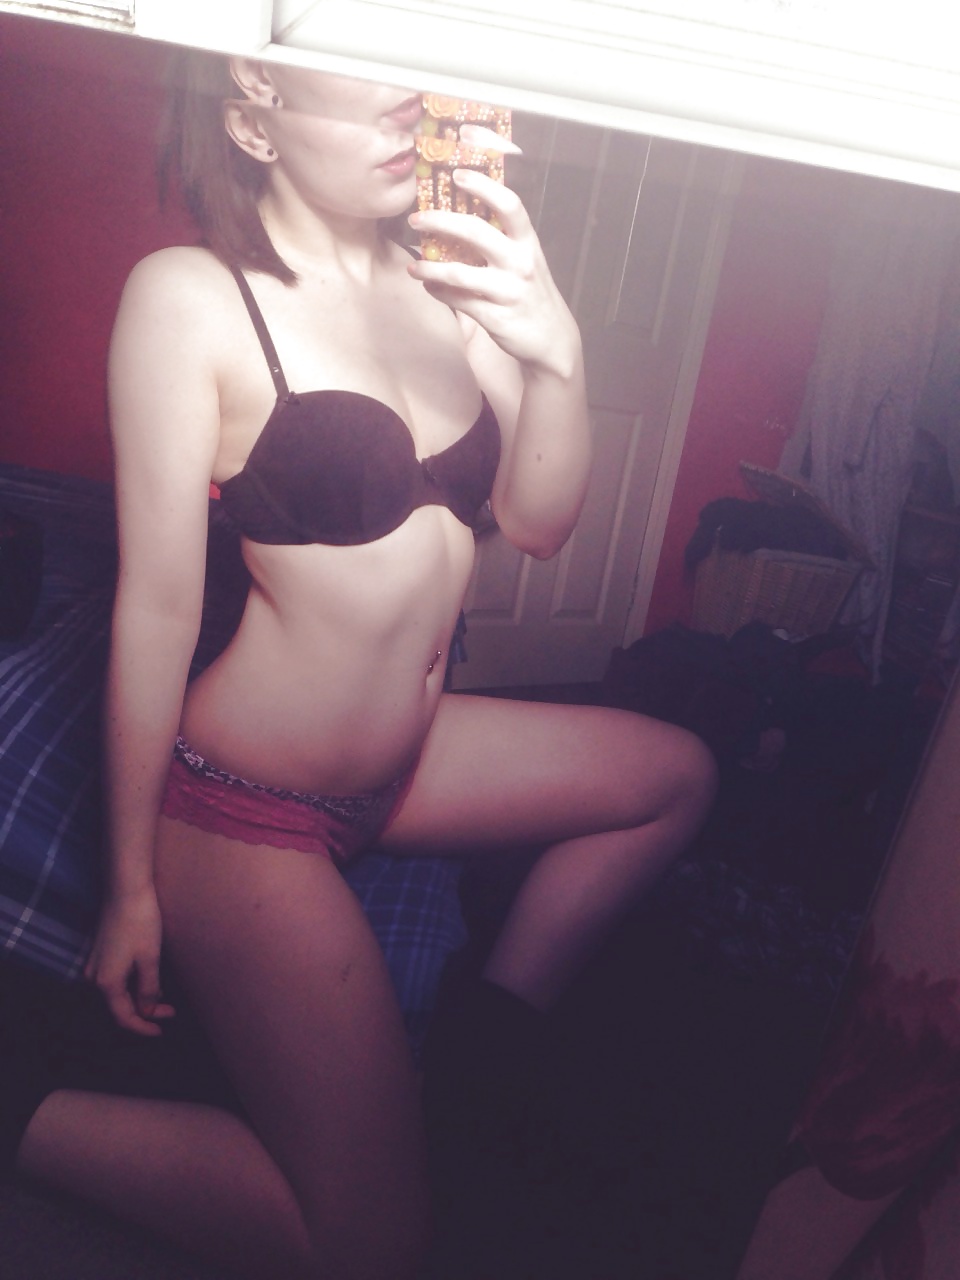 Free GABBY young uk teen girl amateur tits selfshot facebook photos 50003491 picture